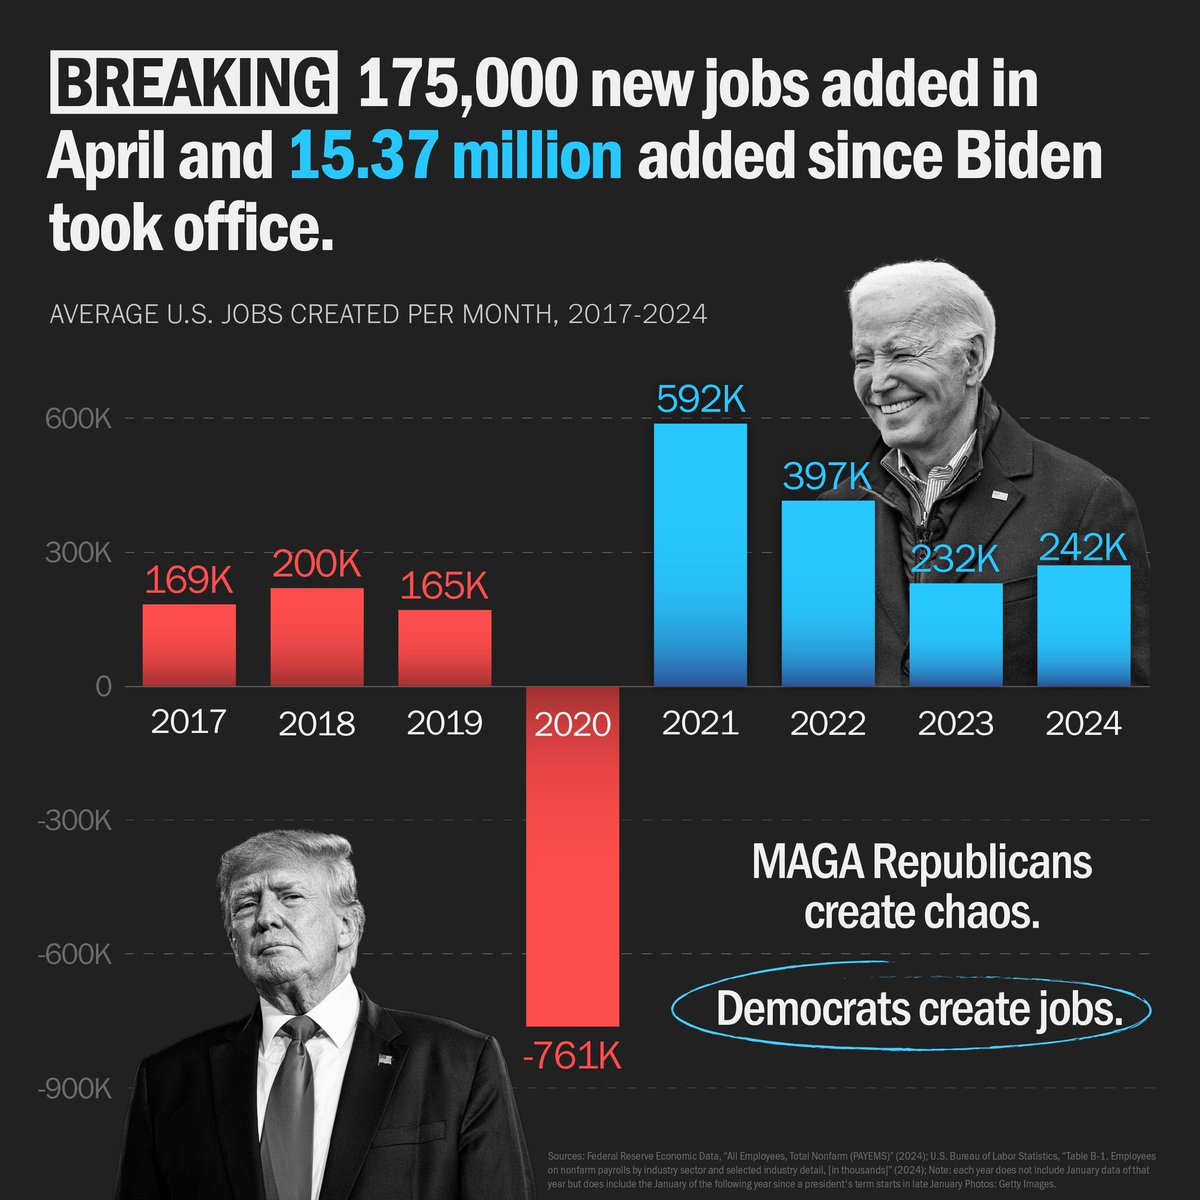 #DemsDeliveredOnJobs 175k new jobs, 3.9% unemployment, 3.9% wage growth, recent stock market records. Democrats always deliver economic growth, though there is more work to do. How has this economy helped you? My retirement account has grown by 30% over last year.